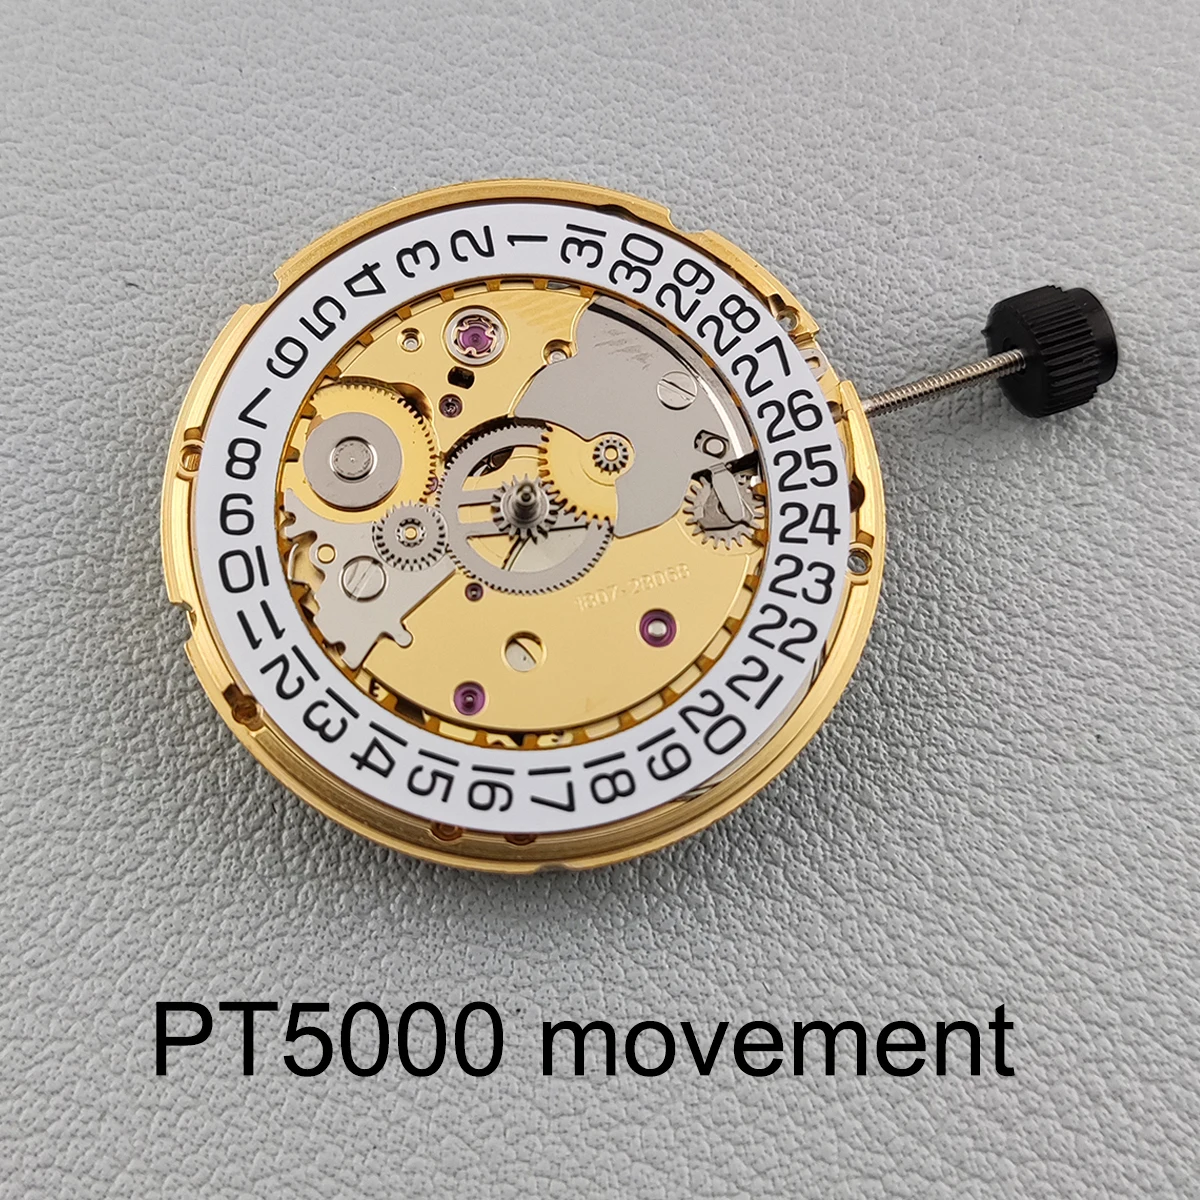 PT5000 High Precision Automatic Movement Watch Movement 21600 Bph-28800 Bph Date Display Replacement 2824 25 Jewels 25.6mm